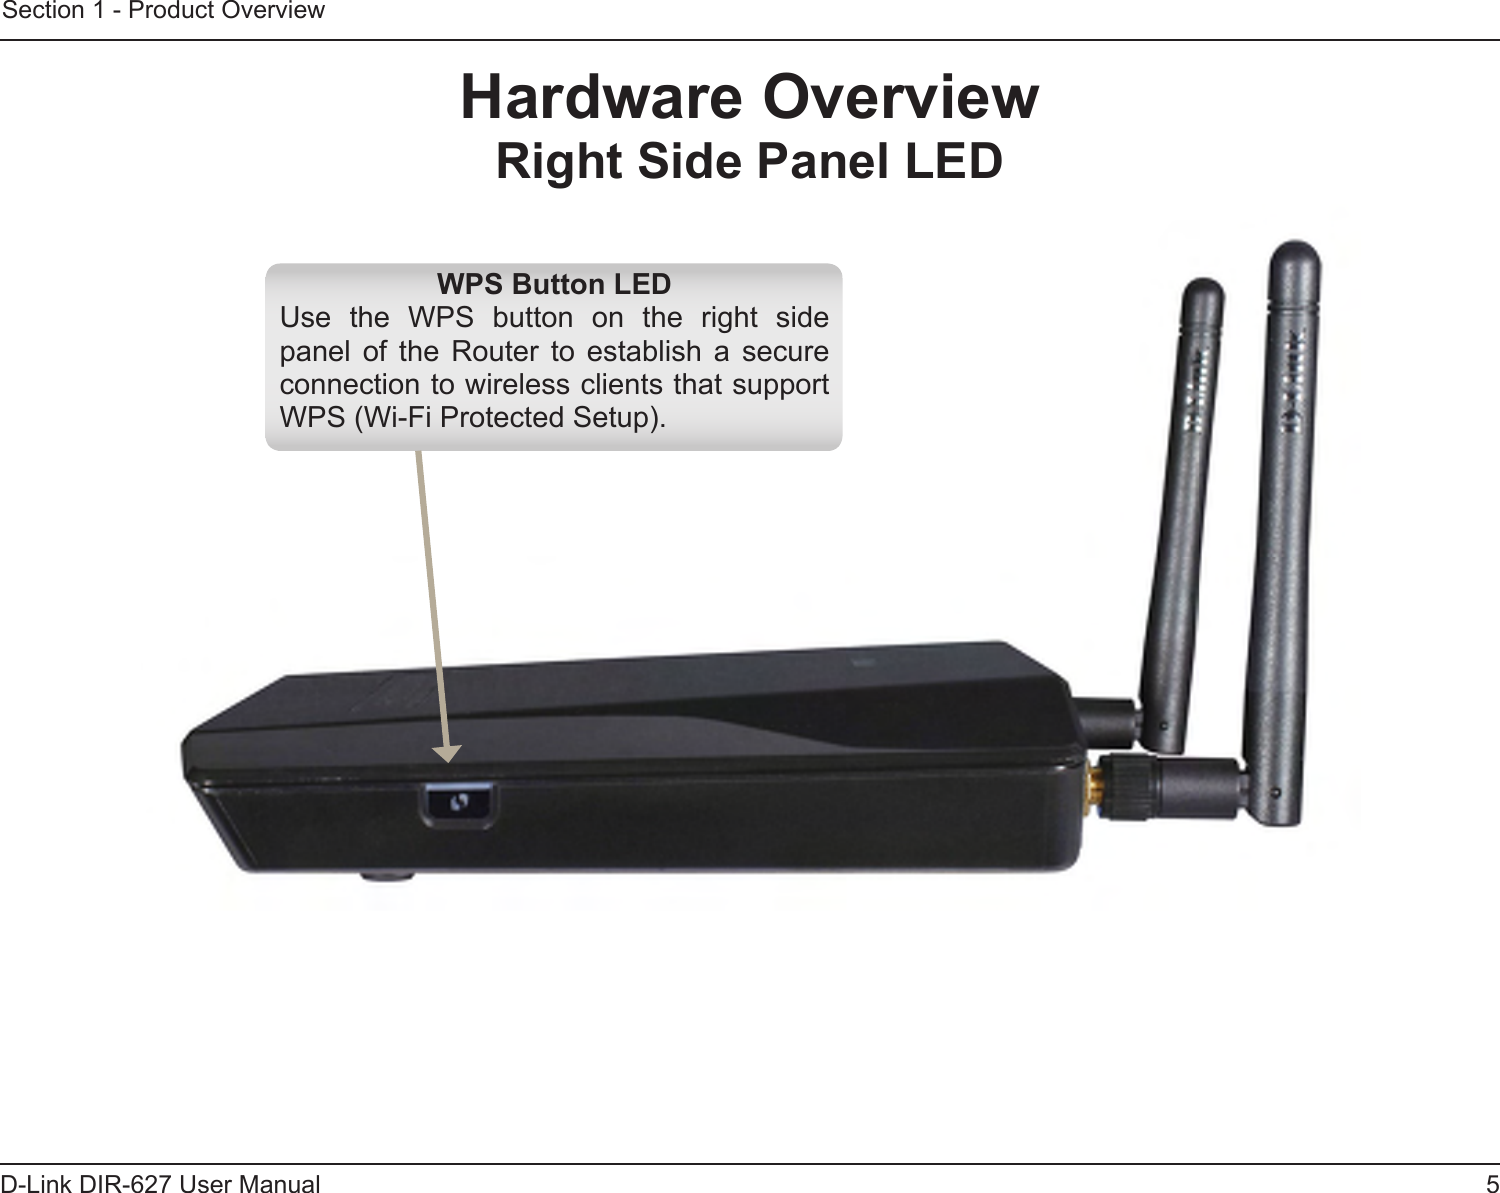 5D-Link DIR-627 User ManualSection 1 - Product OverviewHardwareOverviewRightSidePanelLEDWPSButtonLEDUse  the  WPS  button  on  the  right  side panel  of  the  Router  to  establish  a  secure connection to wireless clients that support WPS (Wi-Fi Protected Setup).